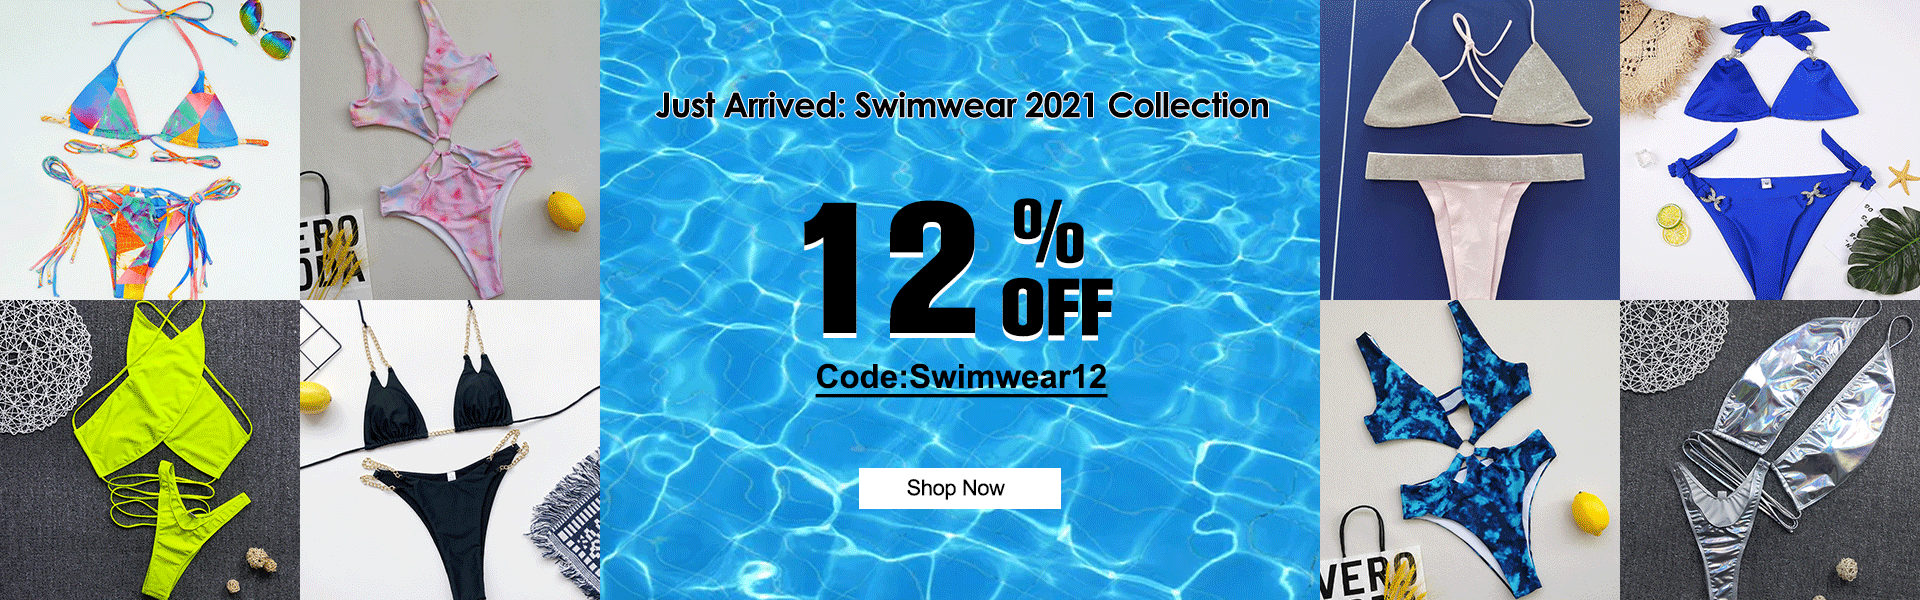 Grab 12% Off On All Swimwear With This Discount Coupon At Jurllyshe.Com